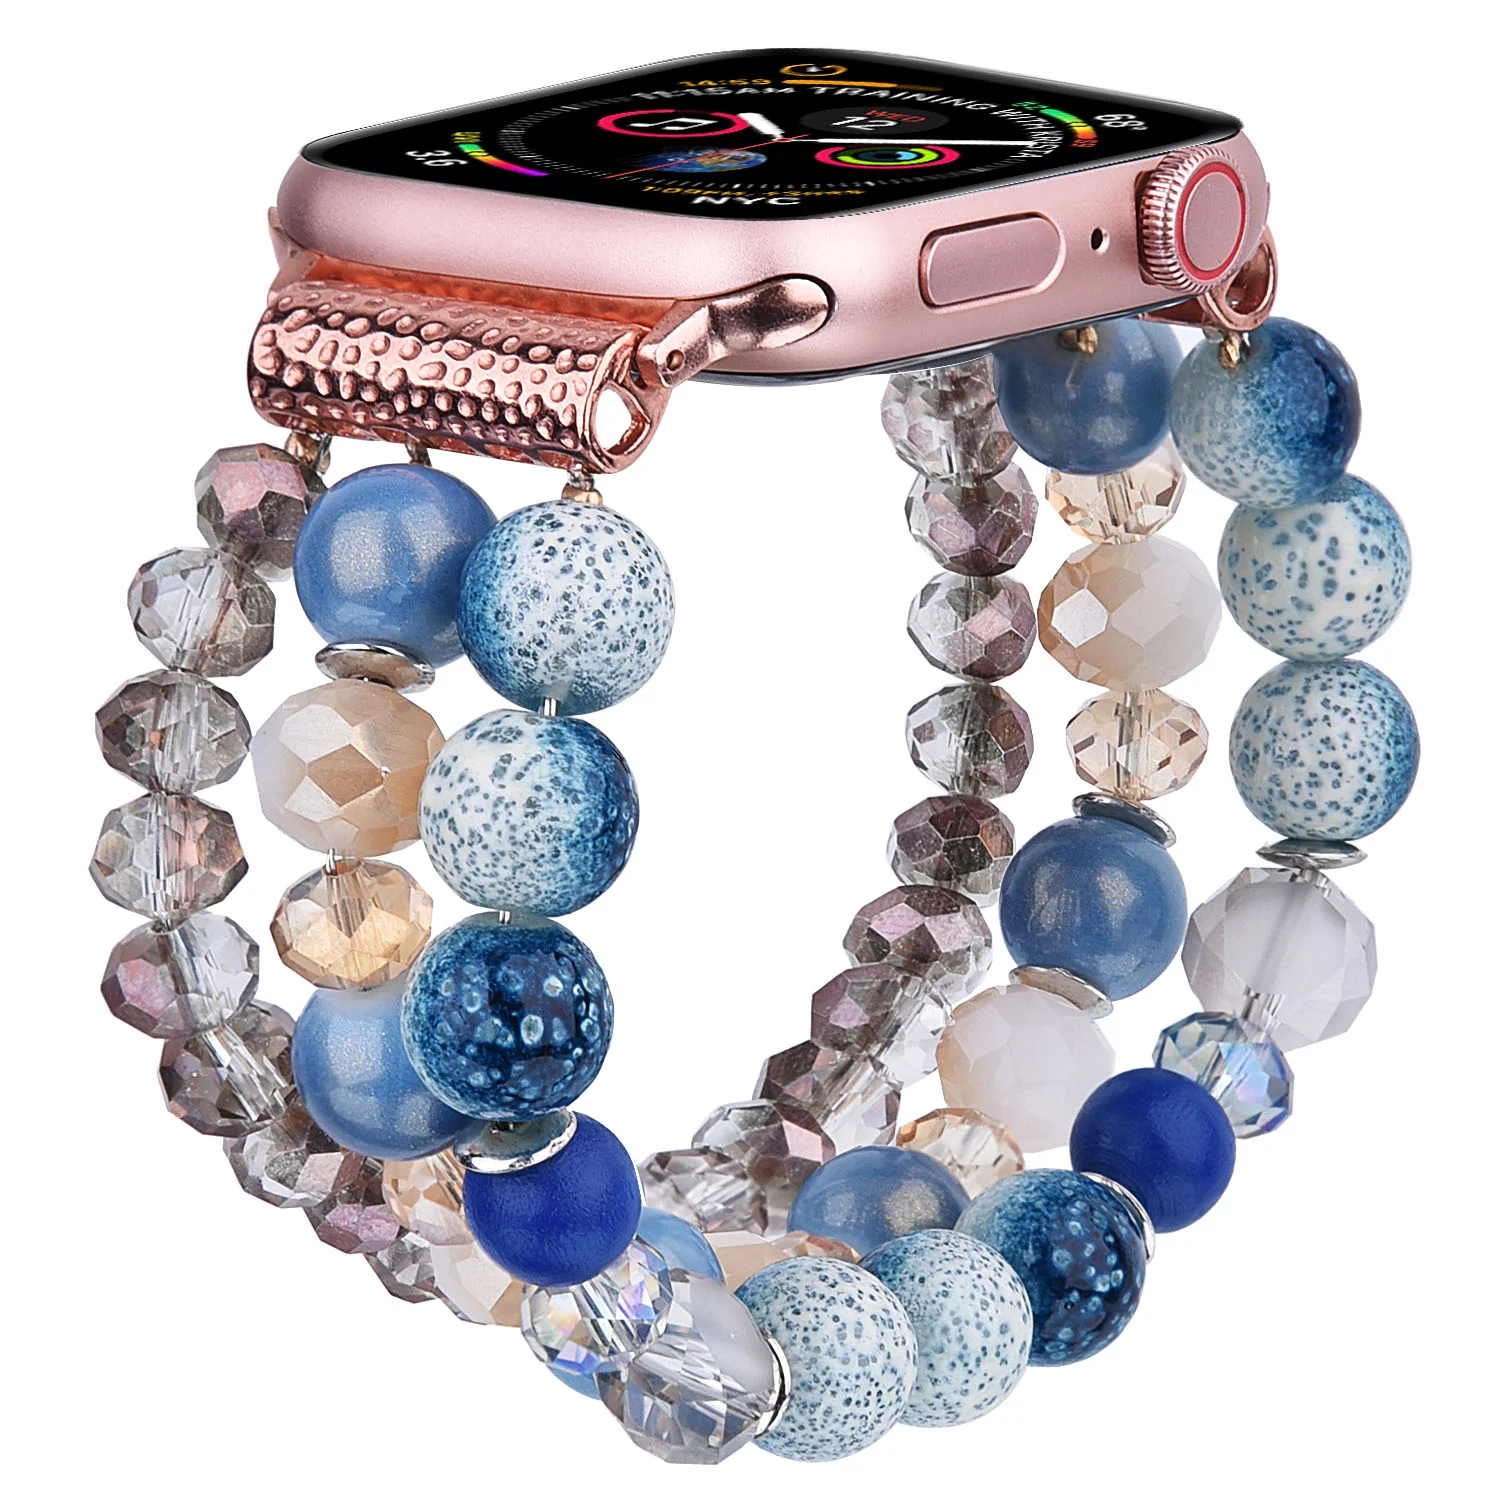 

Beads watch Band for iwatch, Fashion Ladies Pearl Beads Watch Straps for apple Watch 38mm42mm, Watch Bracelet for iphone Watch